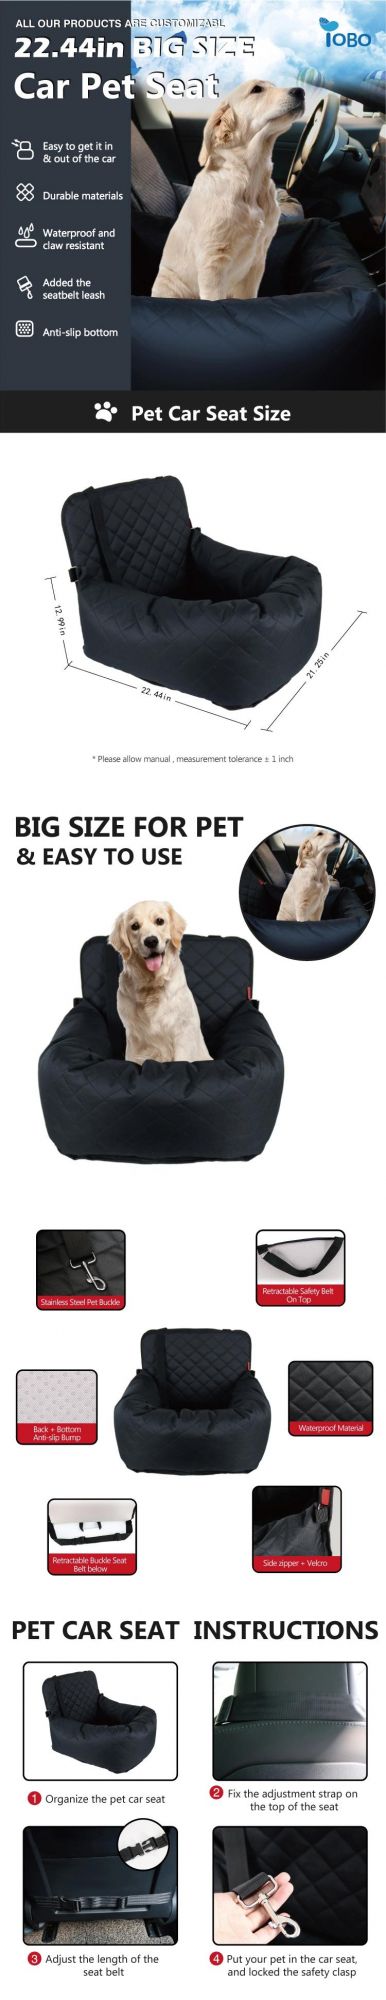 New Fashion Style Portable Car Seat Cover Pet Seat Cover